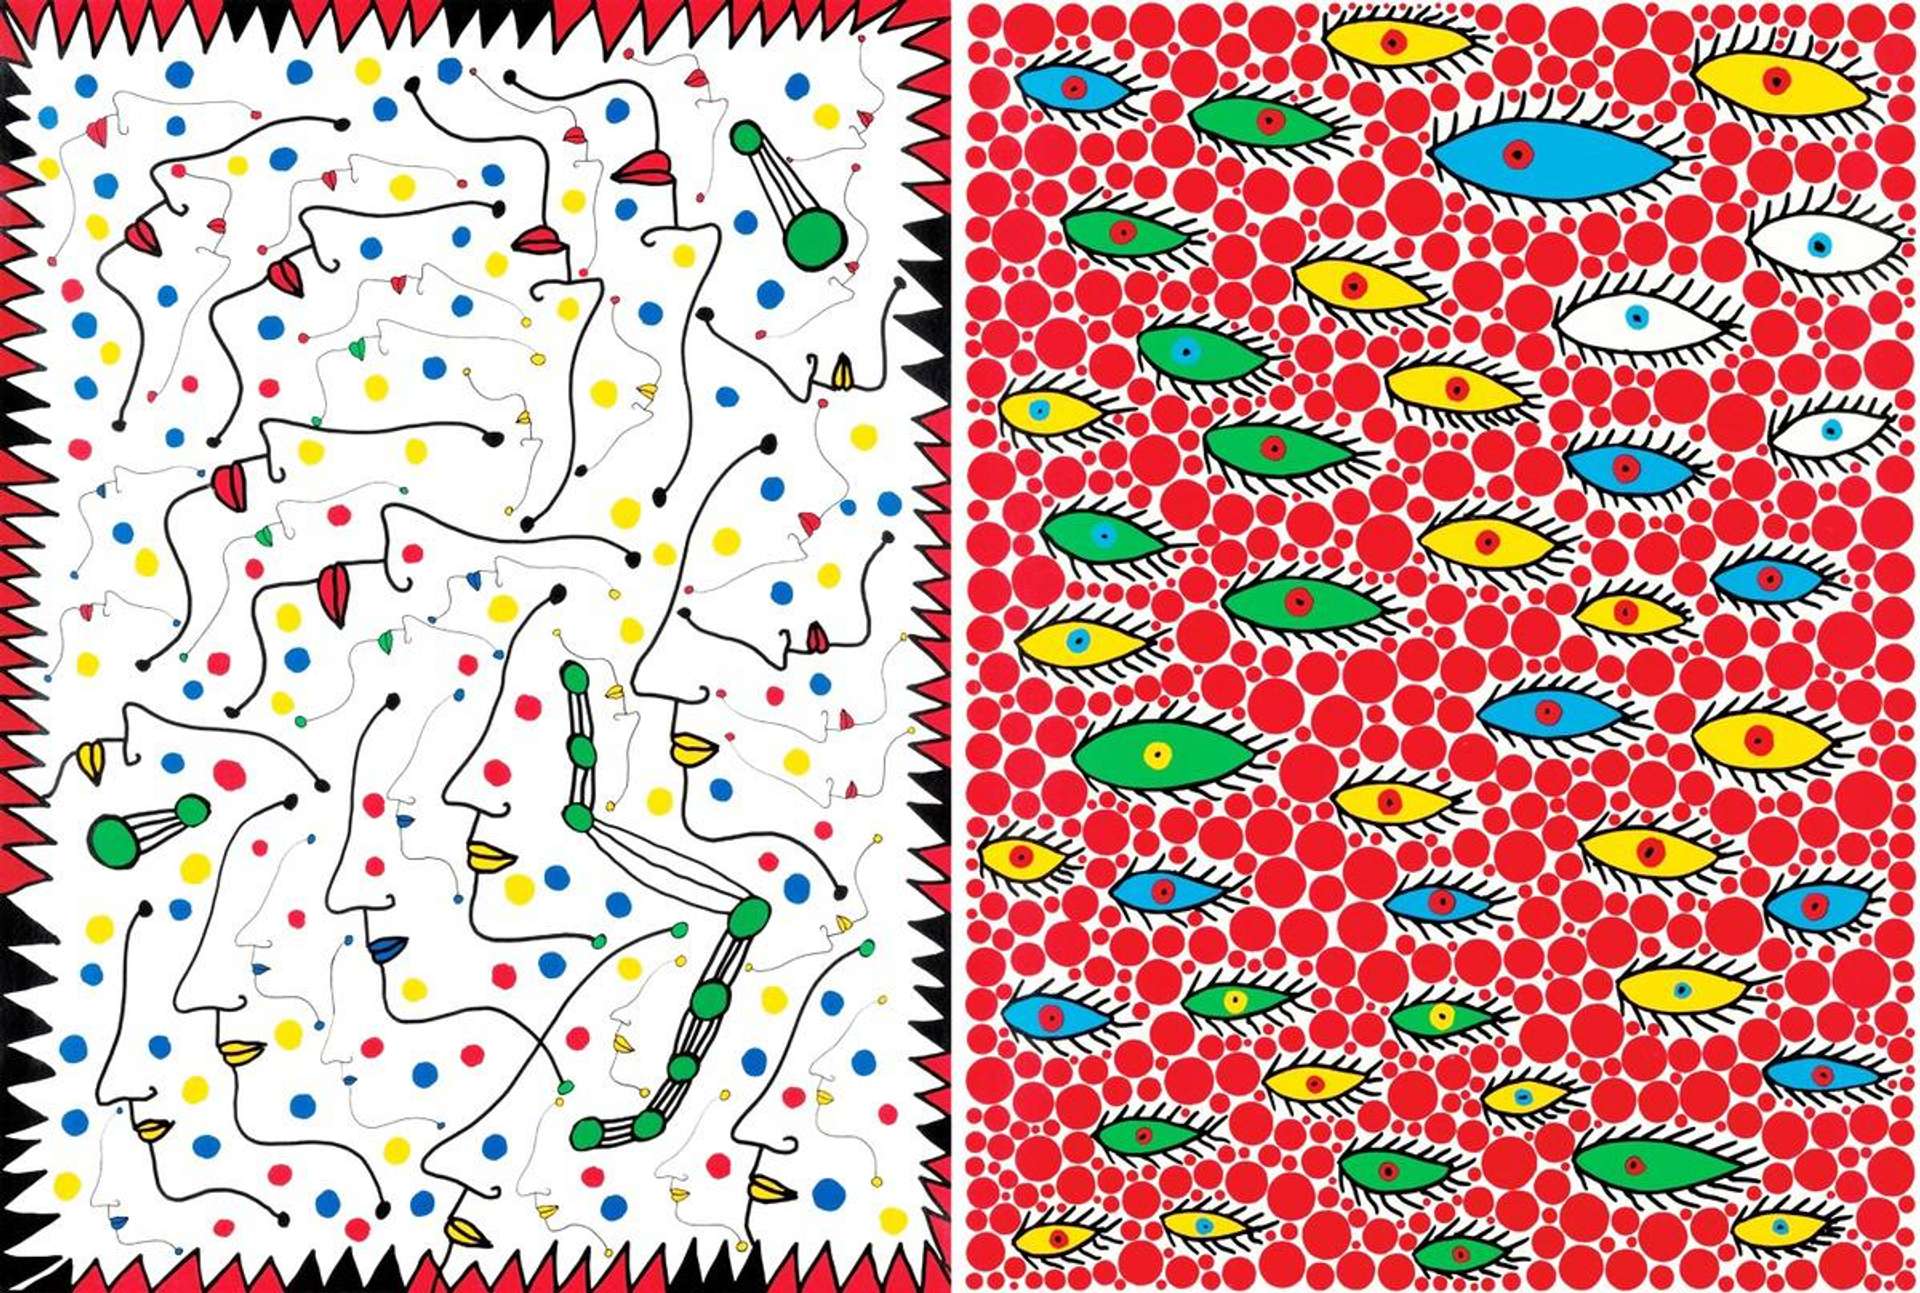 Women And Eyes Flying In The Sky (two works) - Signed Print by Yayoi Kusama 2006 - MyArtBroker